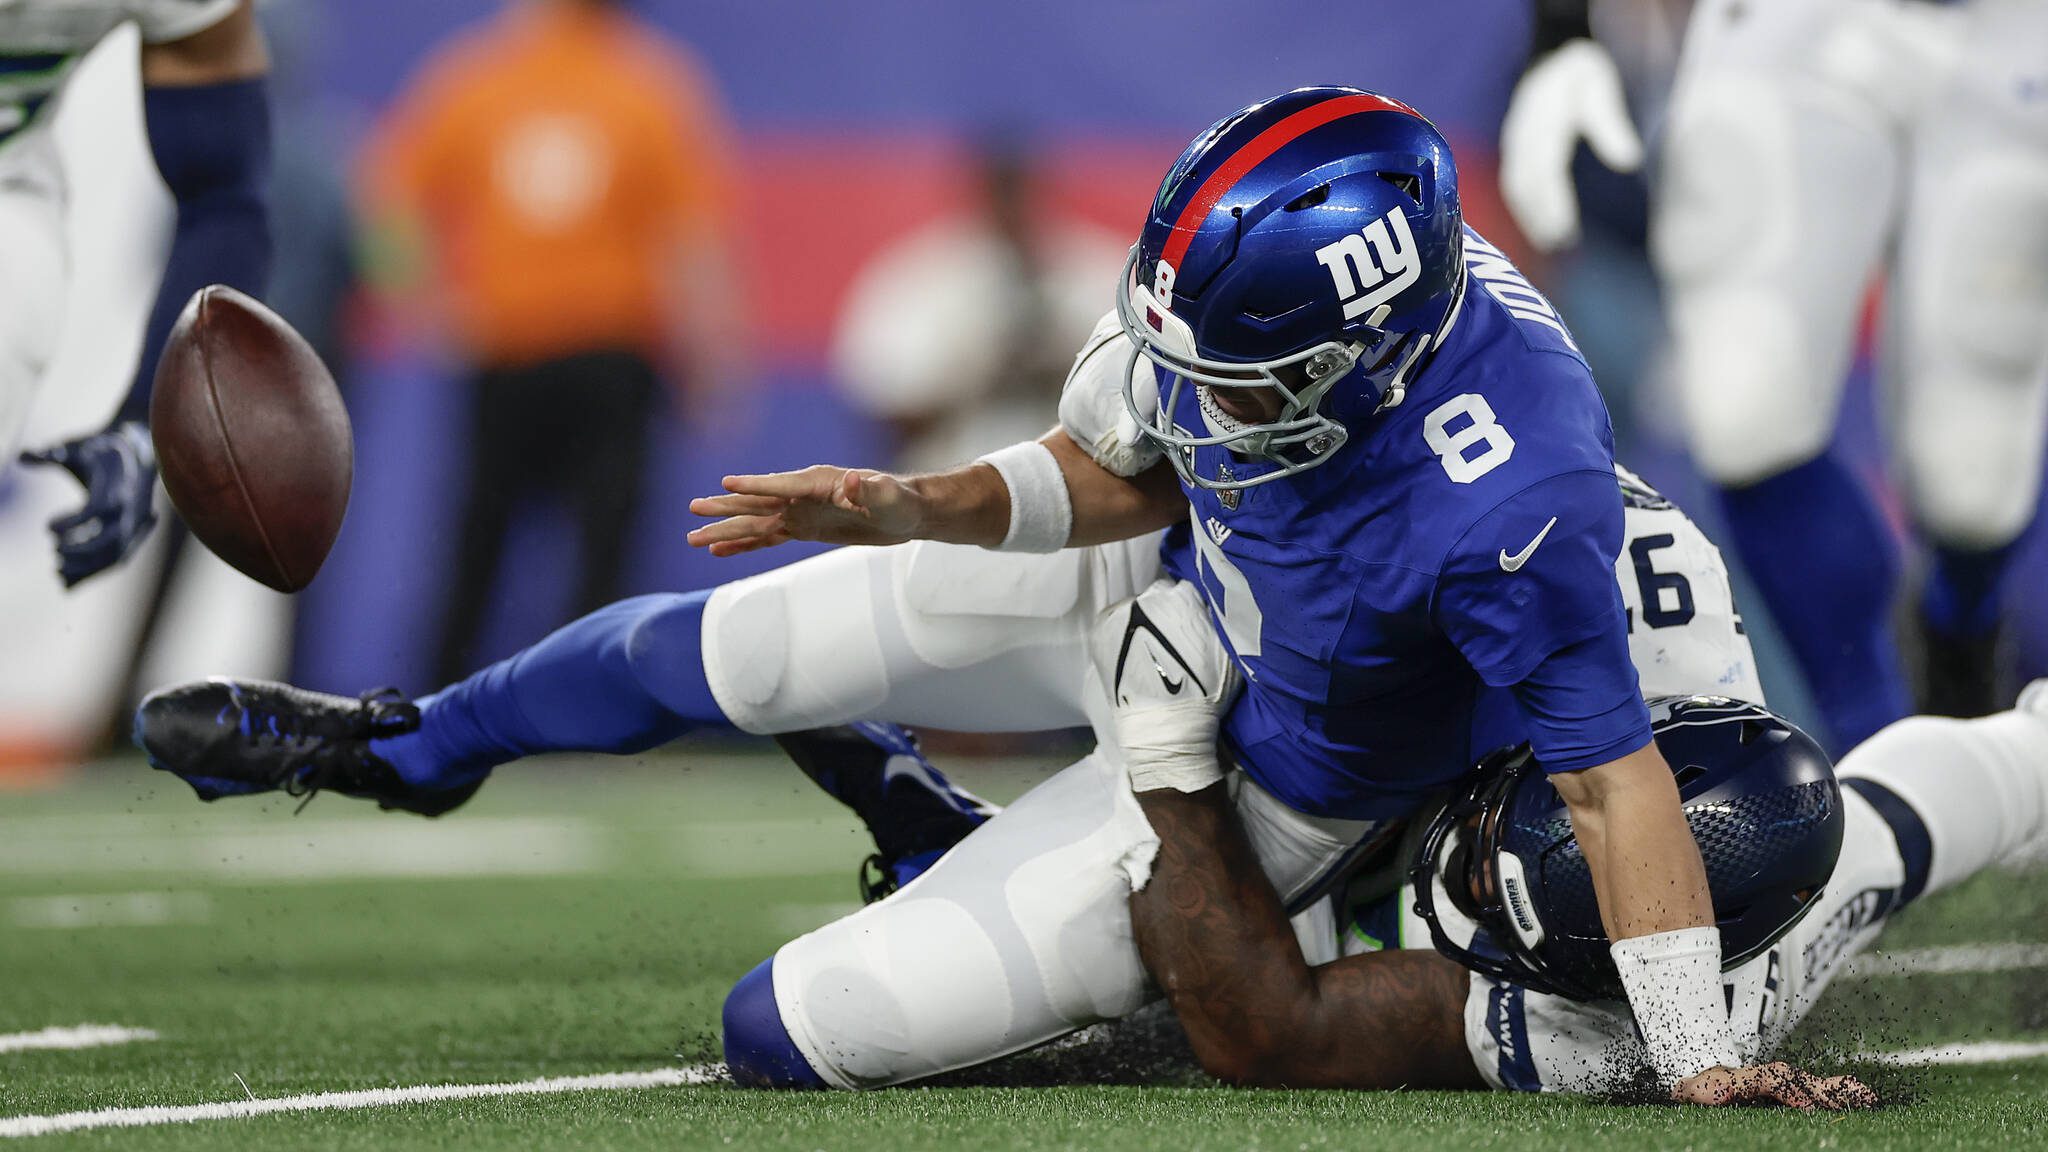 Carroll: Smith 'lucky' to avoid injury after tackle from Giants' Simmons